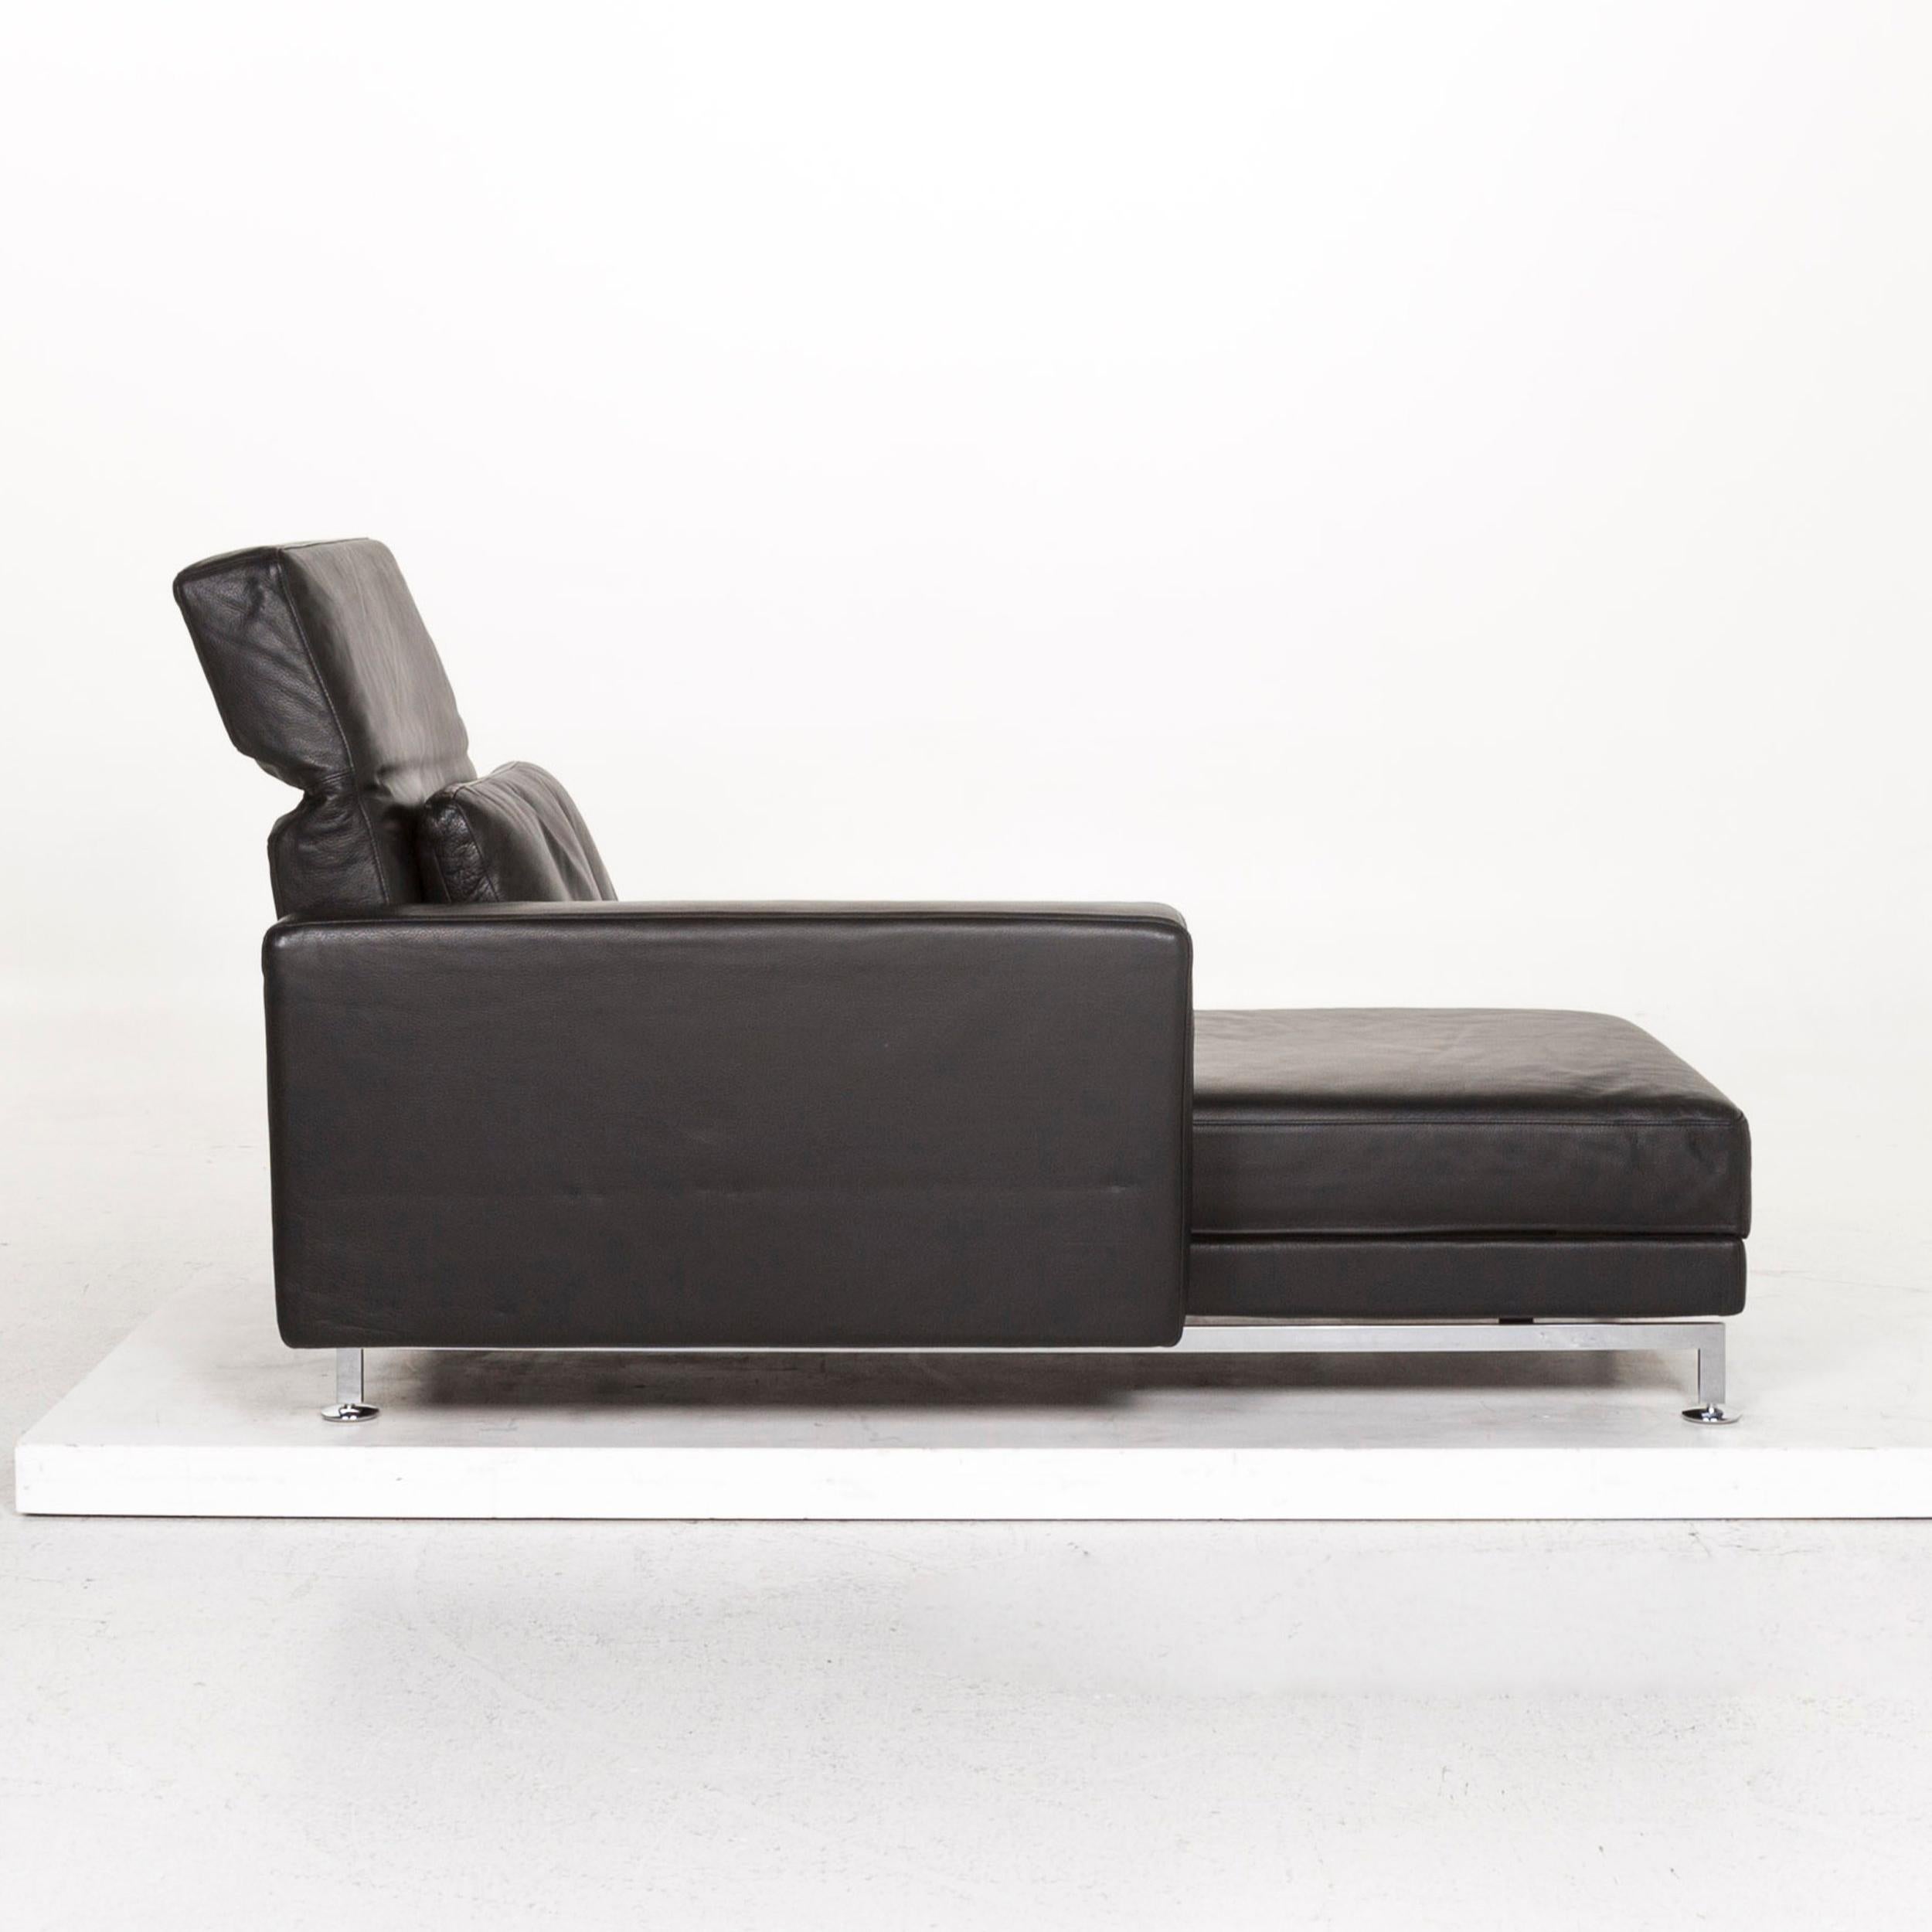 Brühl & Sippold Moule Leather Lounger Black Function Relax Function For Sale 4